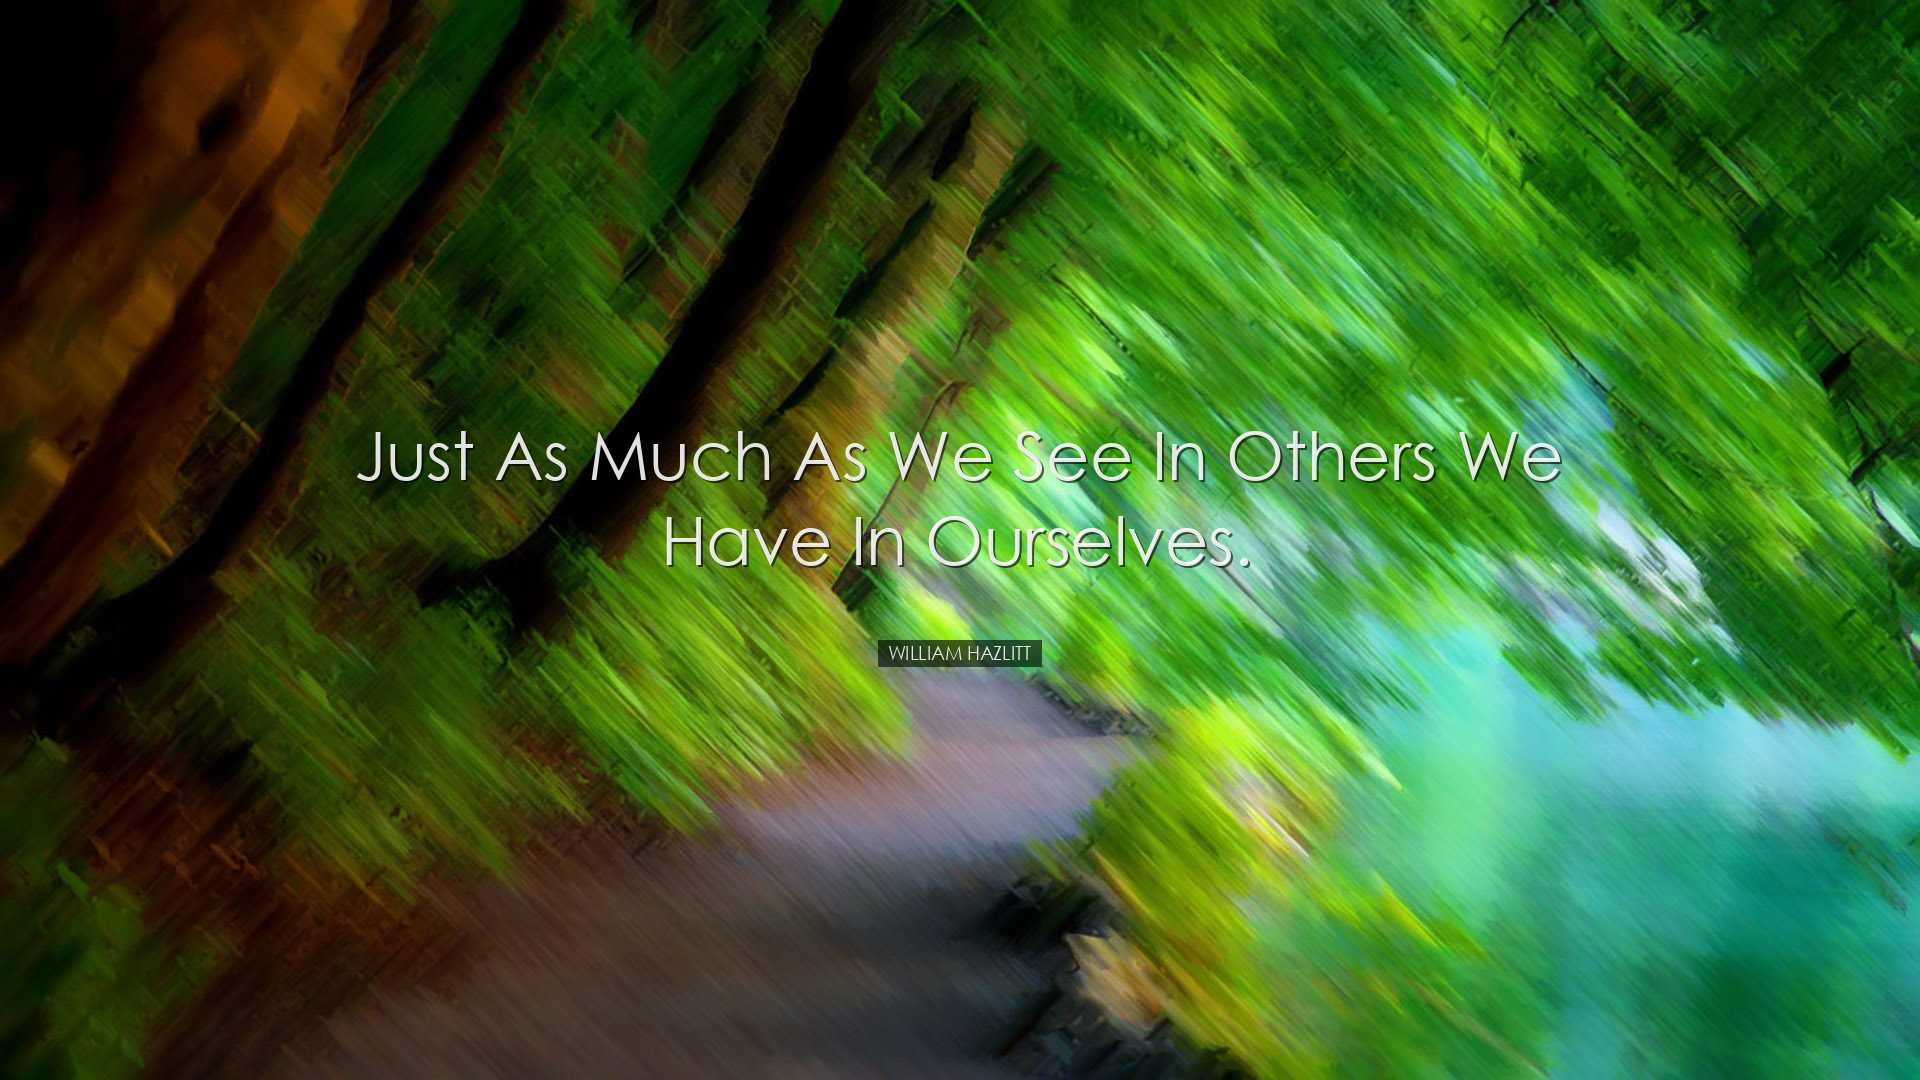 Just as much as we see in others we have in ourselves. - William H